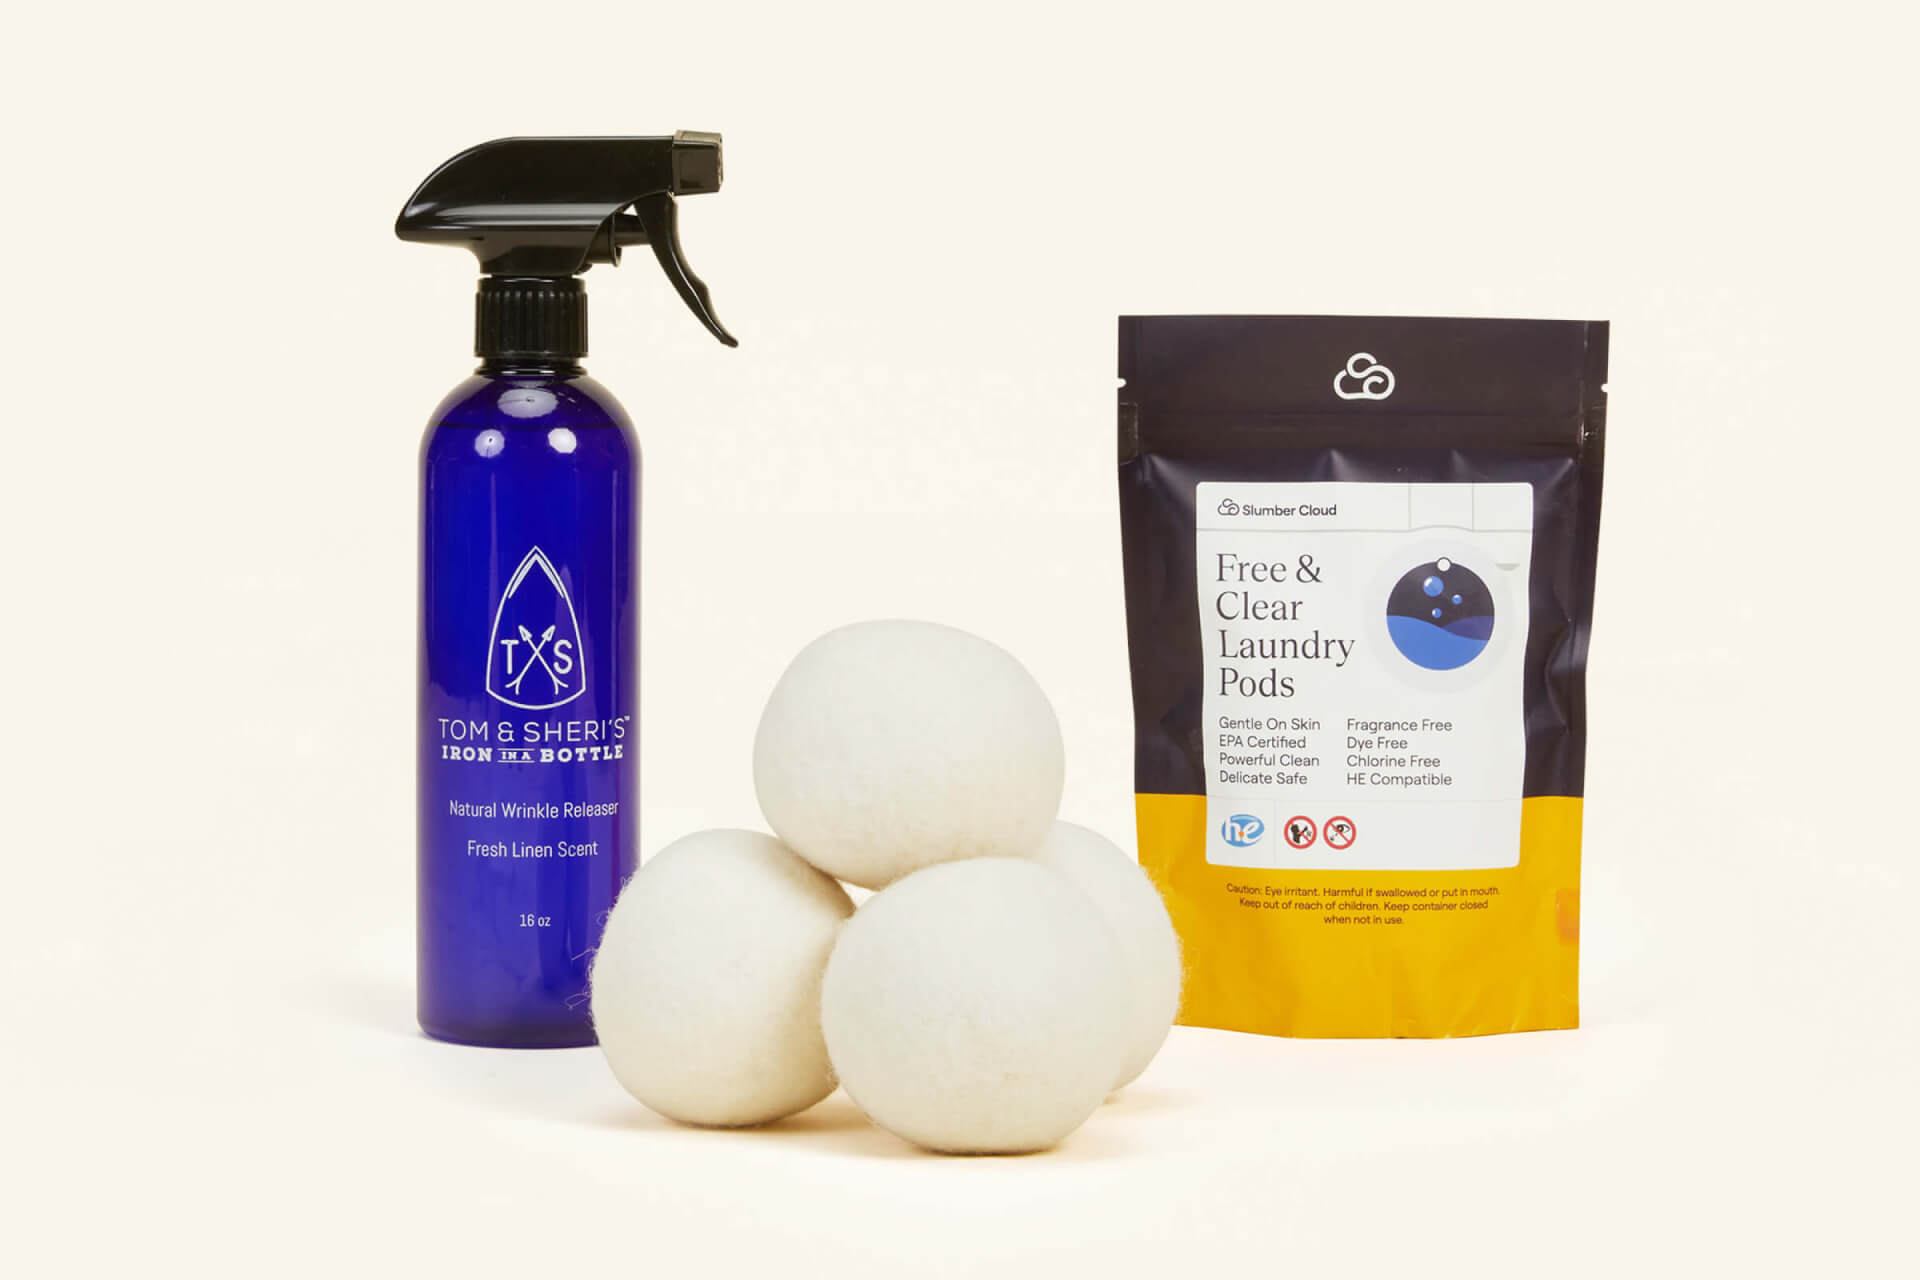 How to Scent Dryer Balls Using Essential Oils - 2 Bees in a Pod